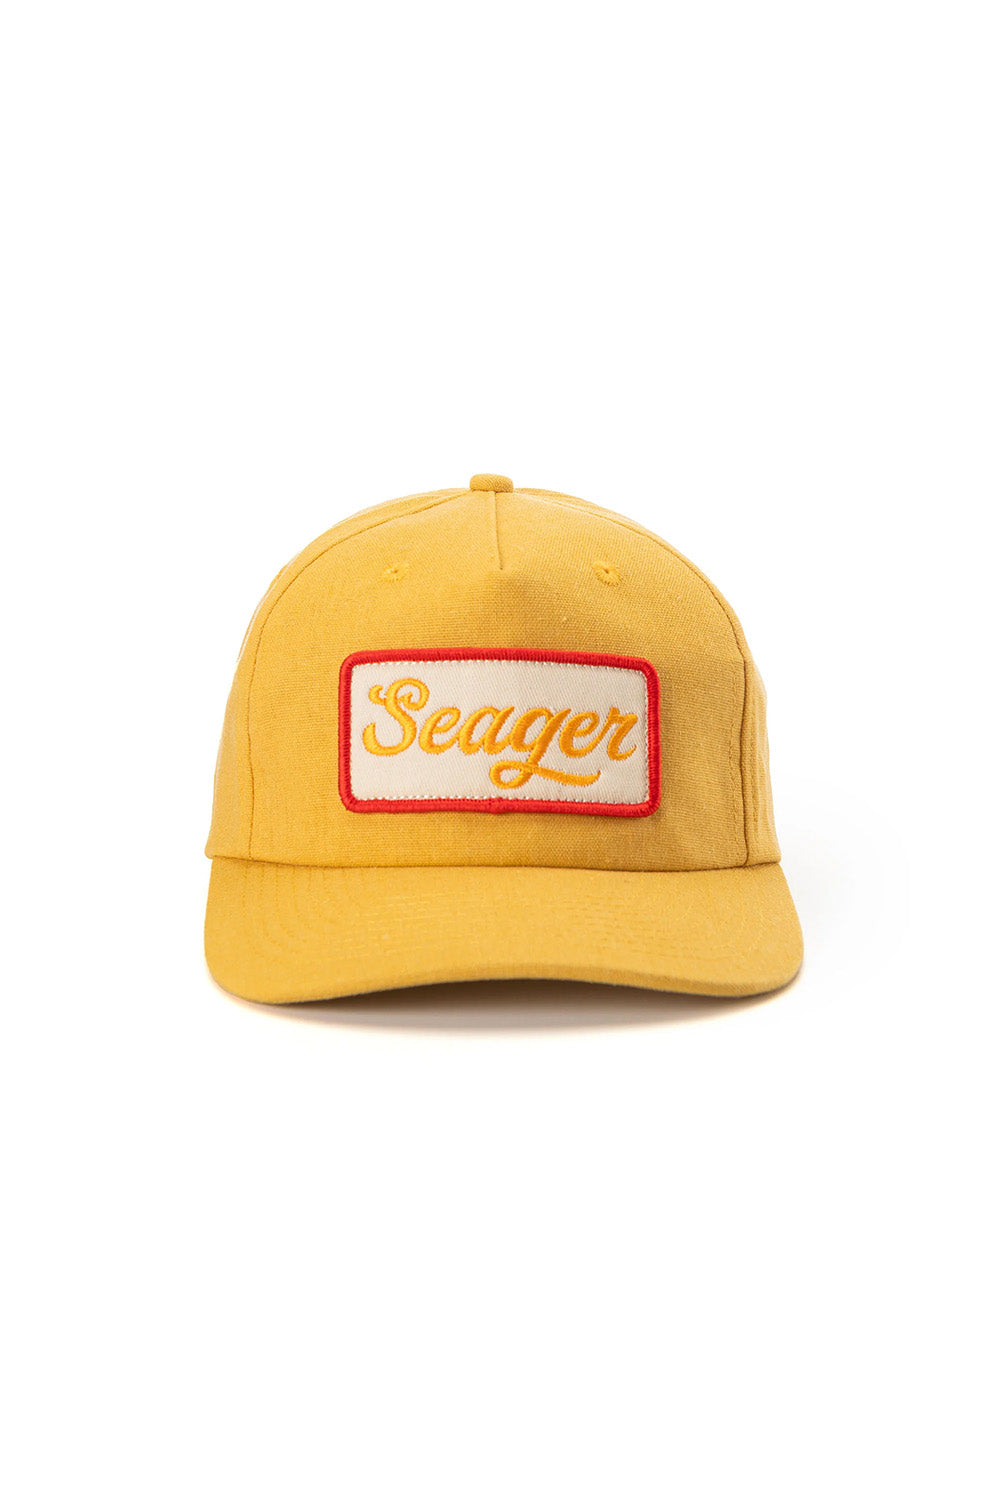 Seager - Uncle Bill Snapback - Gold - Front